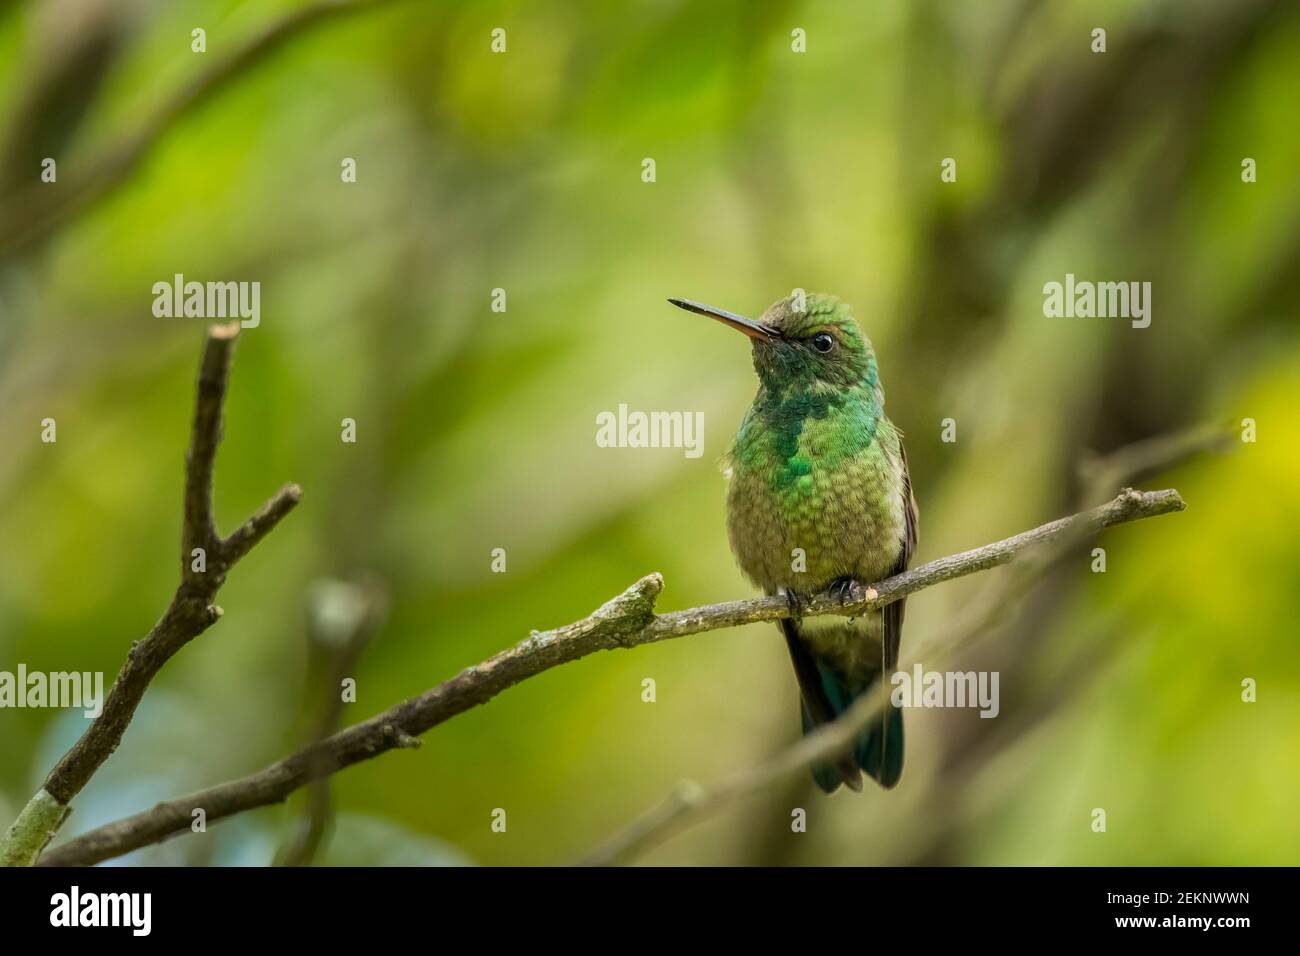 Juvenile tiny hummingbird with green plumage staying still on a branch Stock Photo